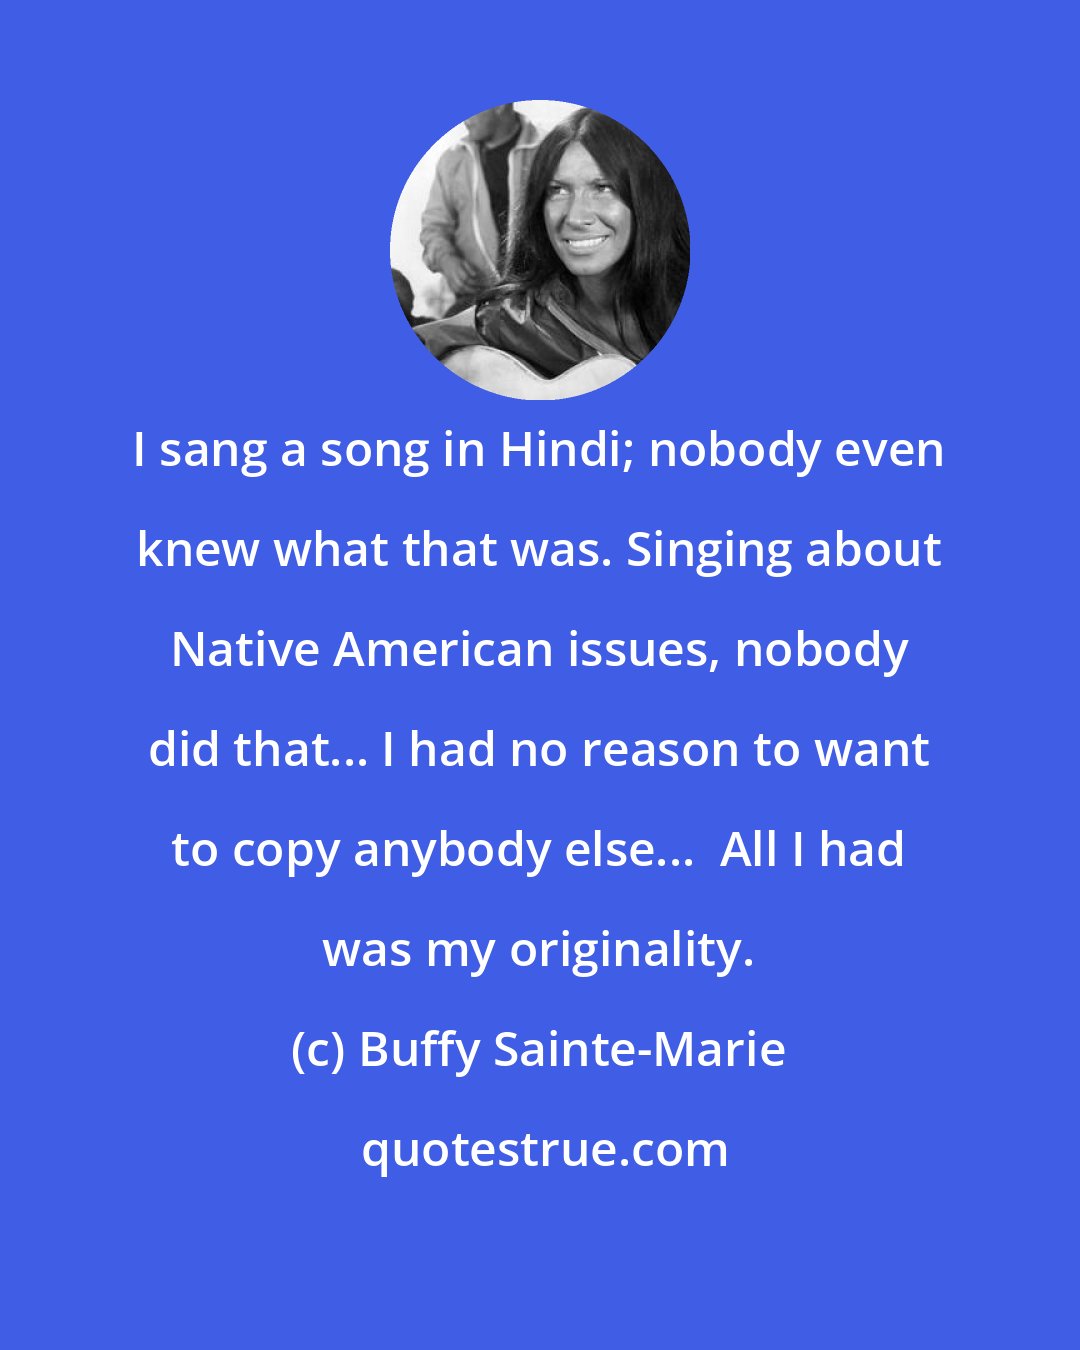 Buffy Sainte-Marie: I sang a song in Hindi; nobody even knew what that was. Singing about Native American issues, nobody did that... I had no reason to want to copy anybody else...  All I had was my originality.